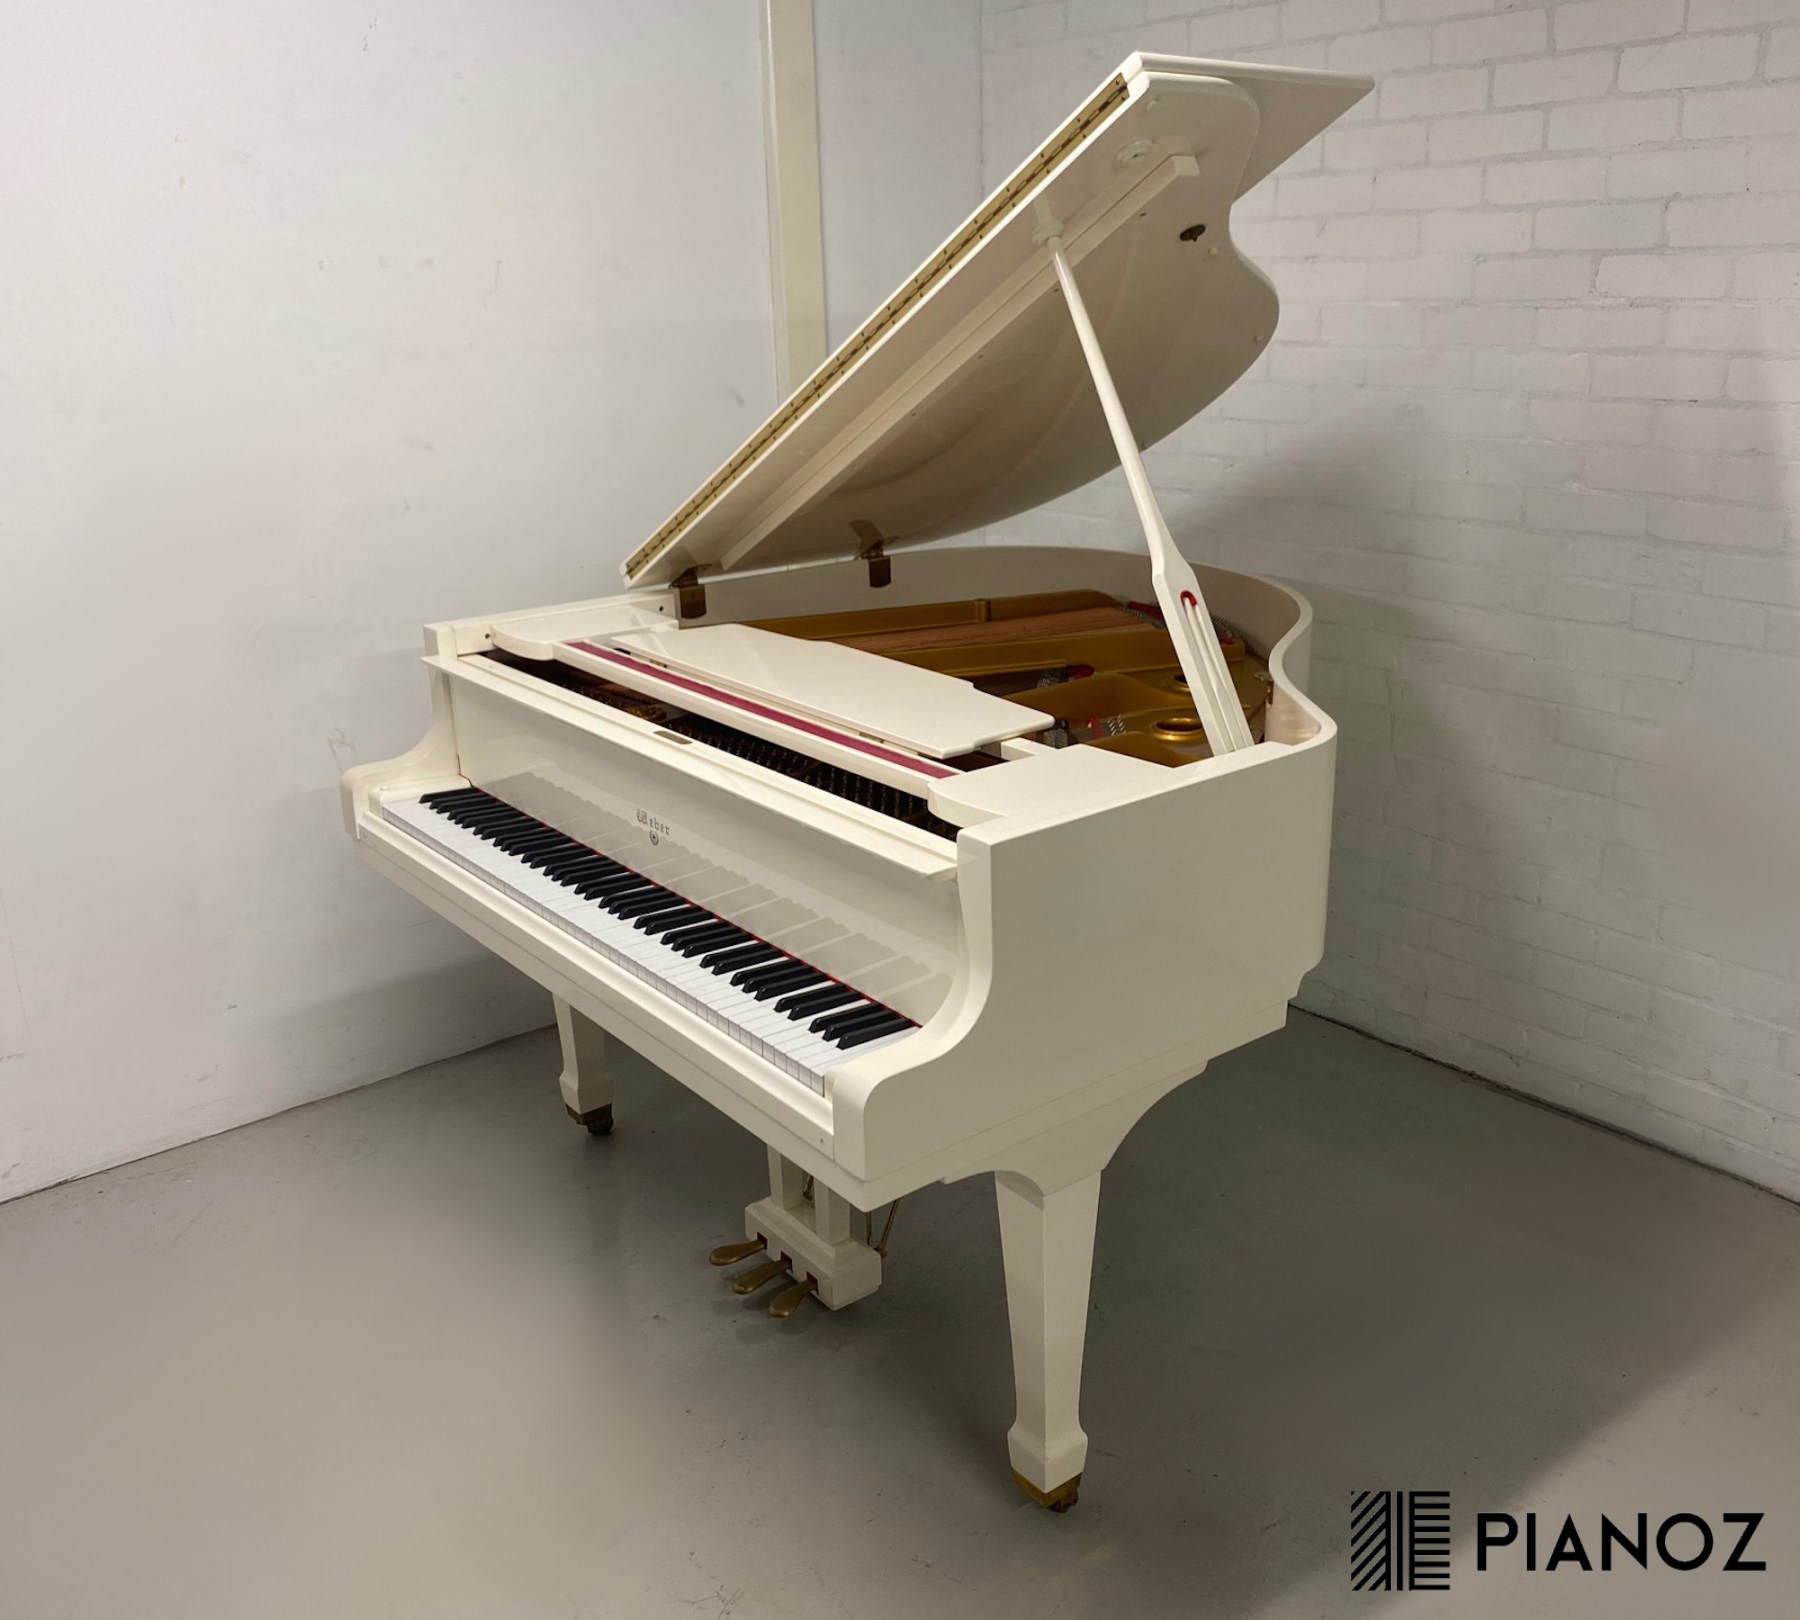 Weber White Baby Grand Piano piano for sale in UK